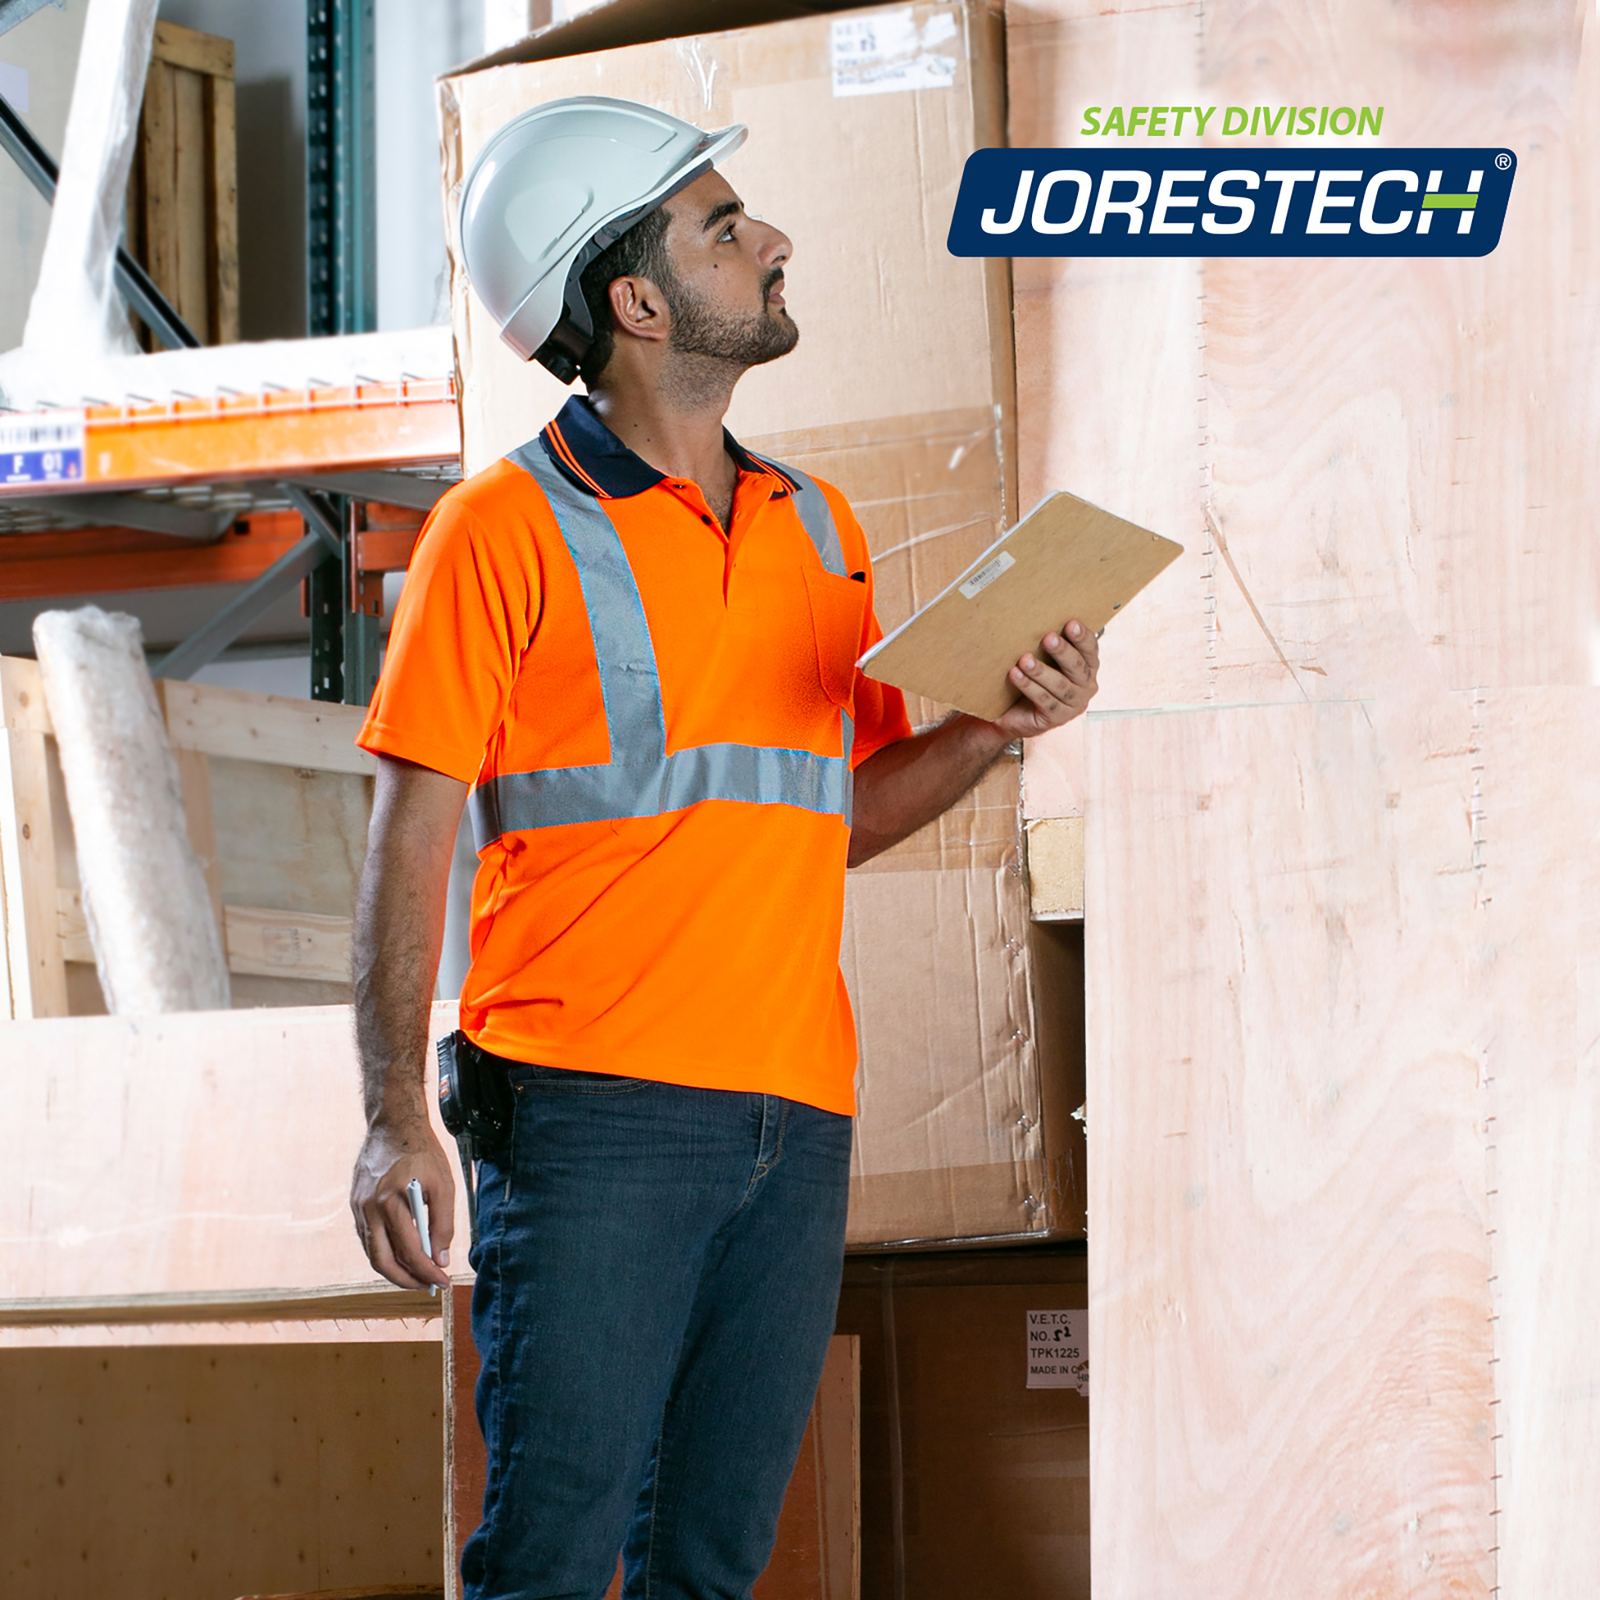 Worker  wearing an orange JORESTECH safety polo shirt while doing inventory inside a warehouse.